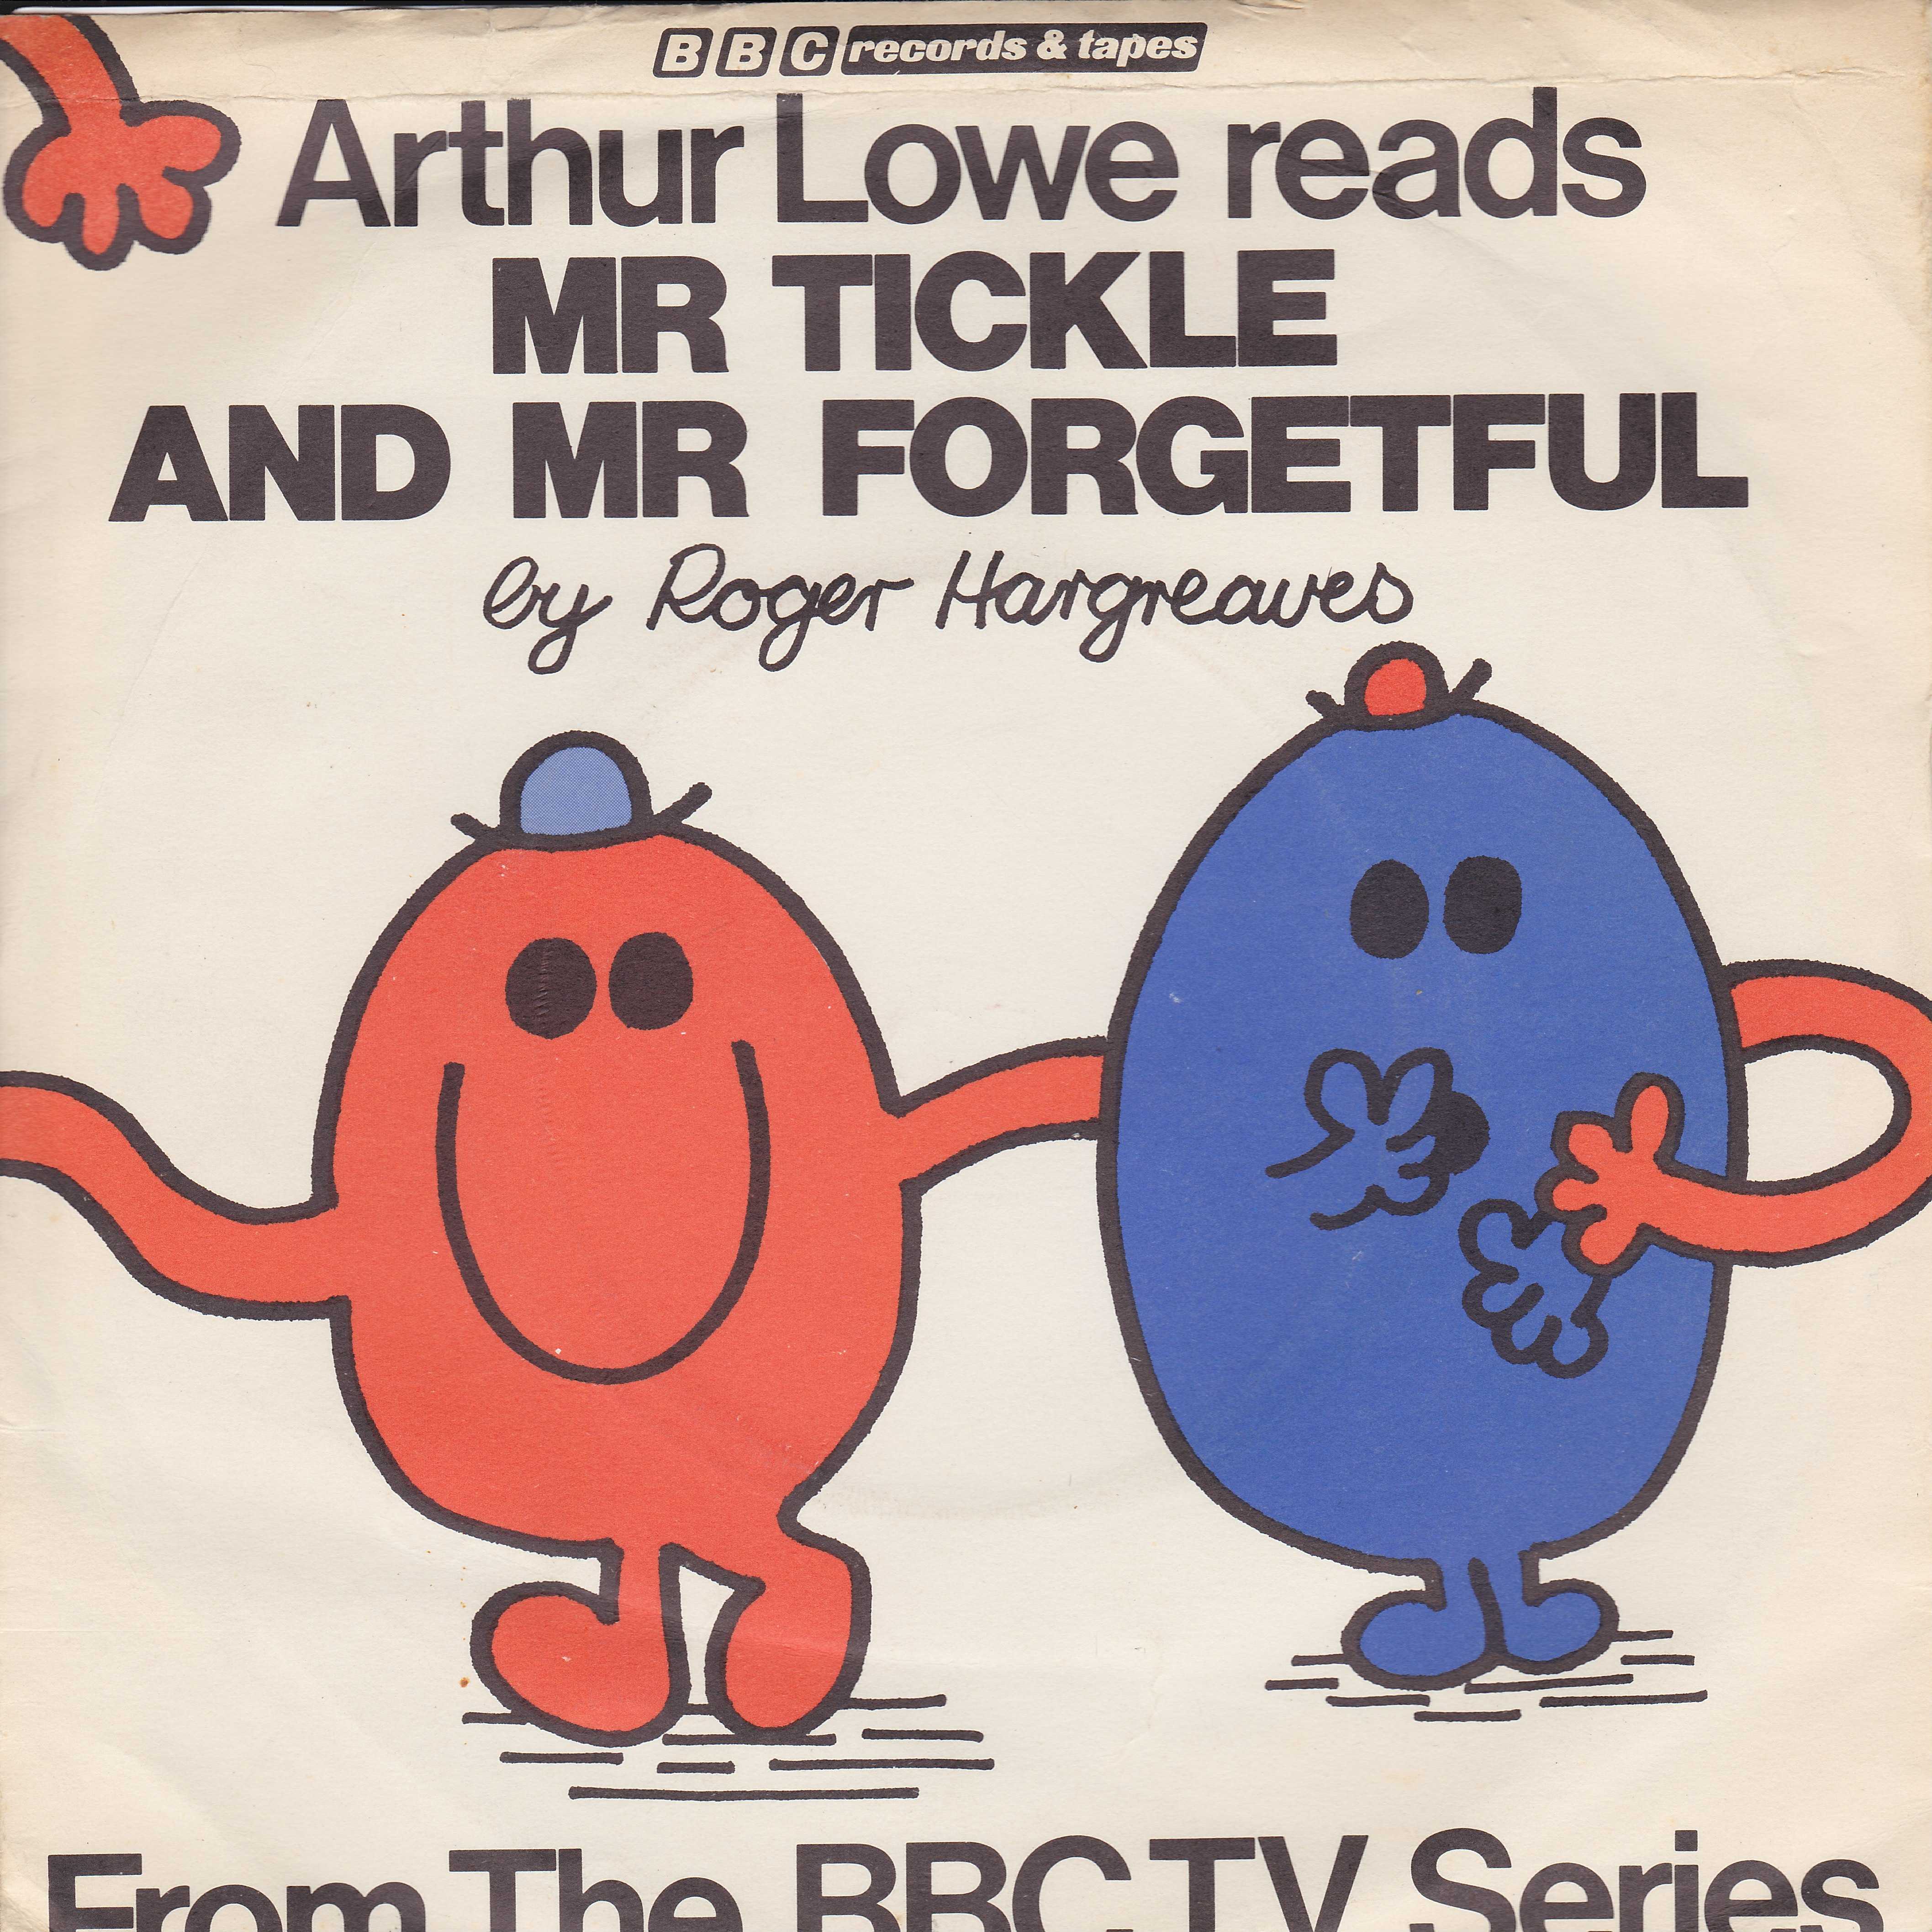 Picture of RESL 43 Mr Men - Mr Tickle by artist Roger Hargreaves from the BBC singles - Records and Tapes library